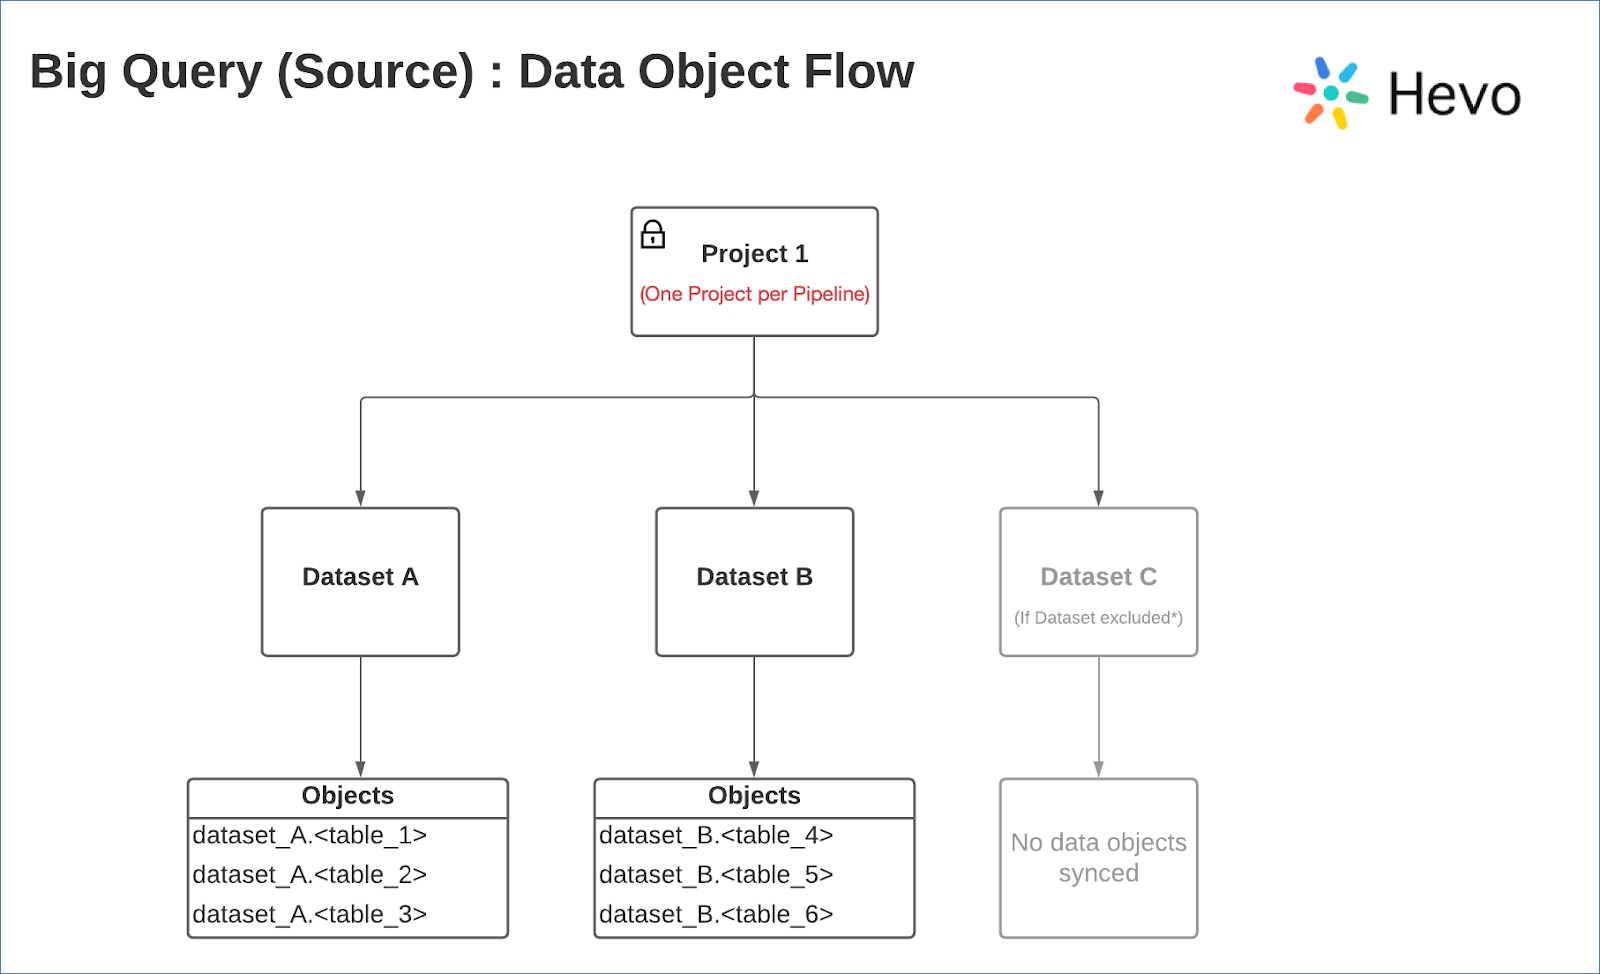 BigQuery to SQL Server: Projection of data flow in BigQuery Project